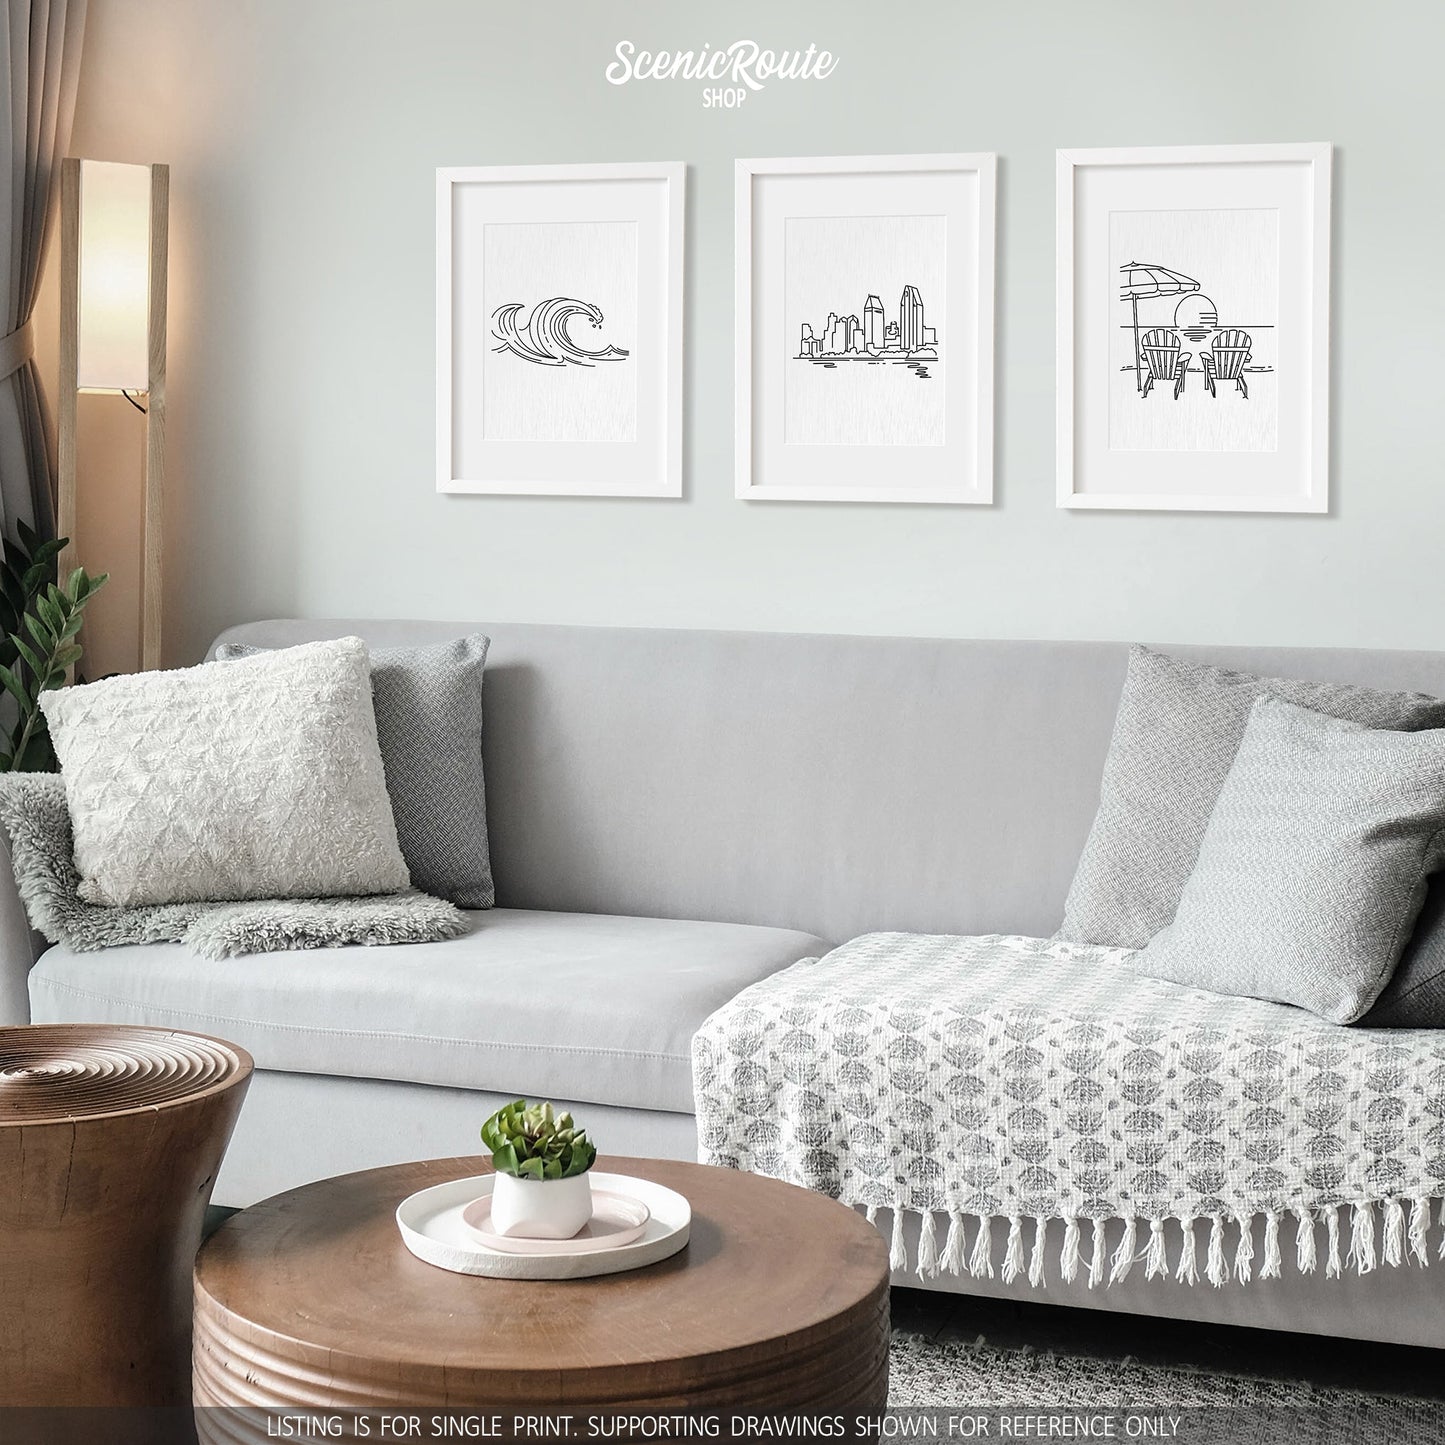 A group of three framed drawings on a white wall hanging above a couch with pillows and a blanket. The line art drawings include Waves, San Diego Skyline, and Adirondack Beach Chairs